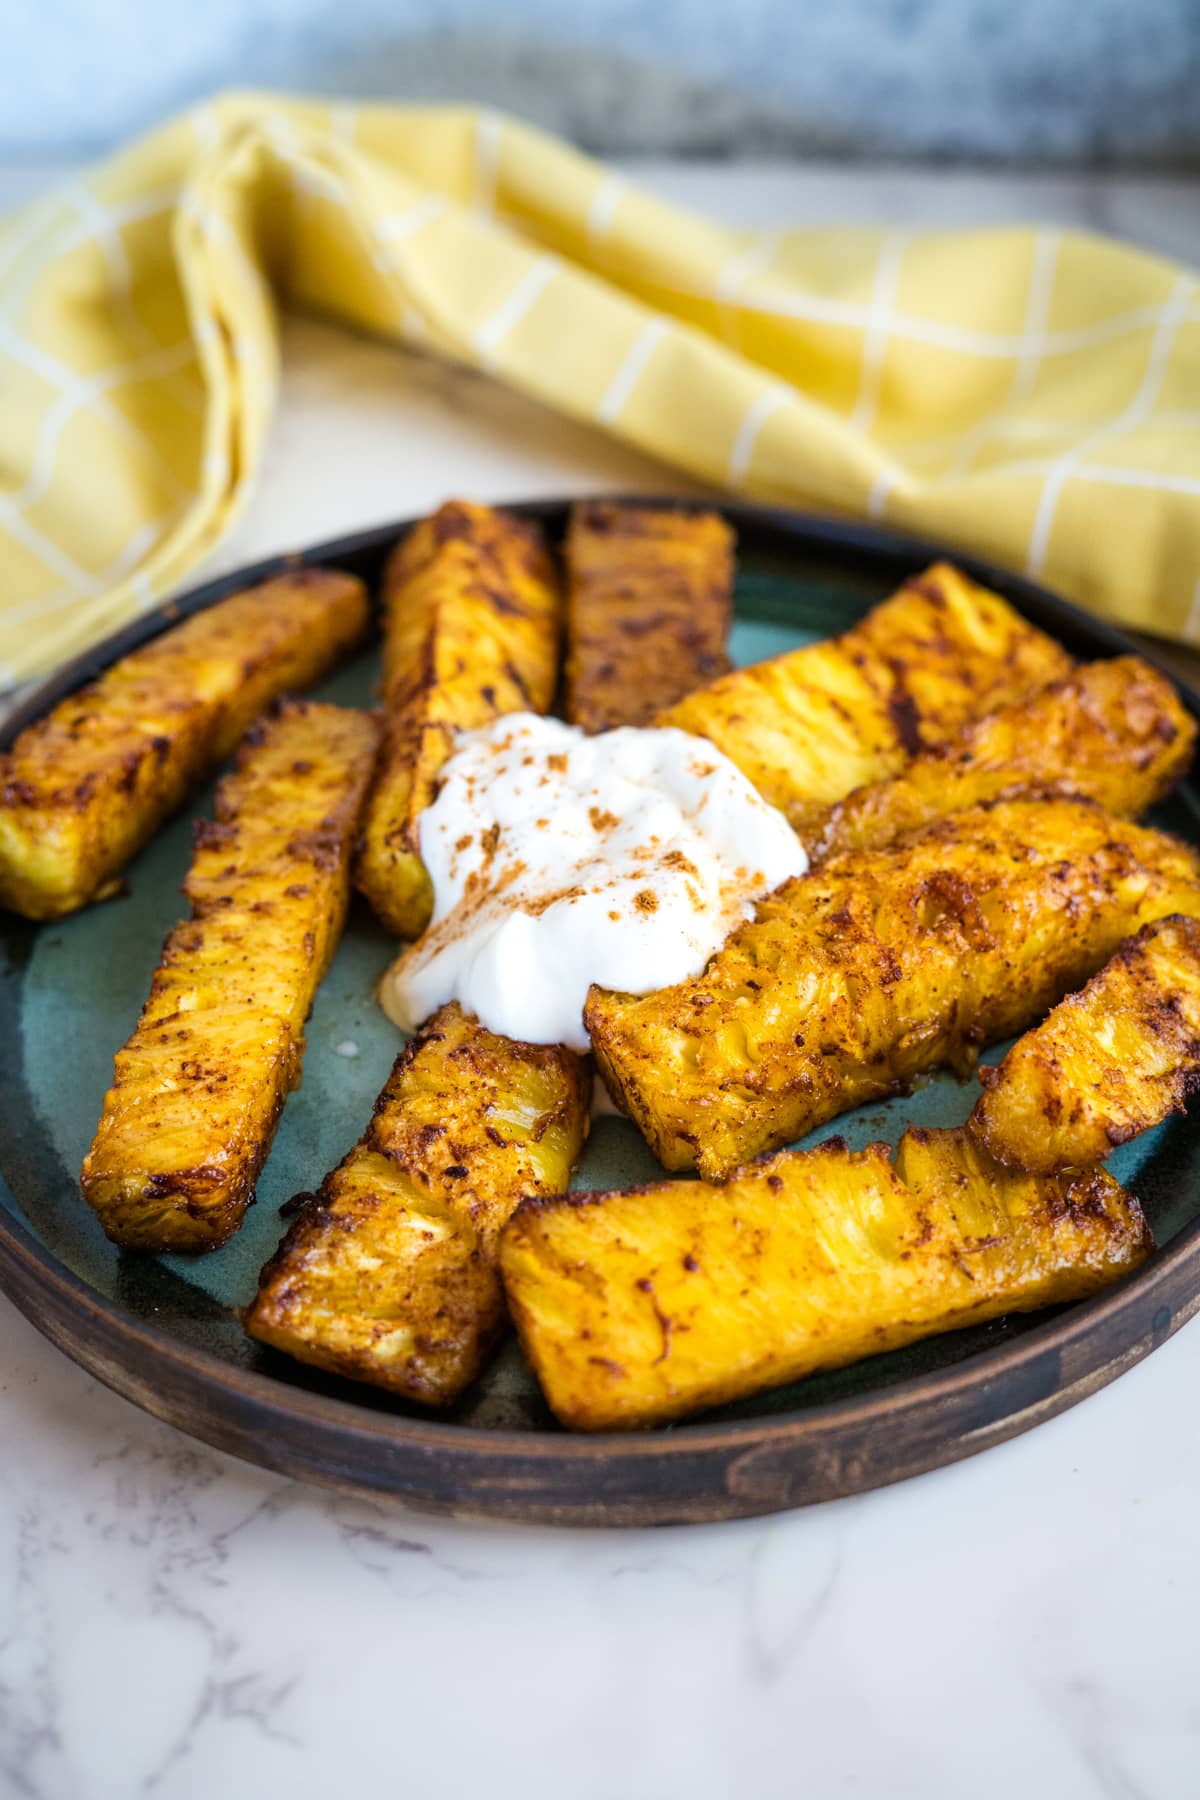 Grilled pineapple wedges with sour cream on a plate.